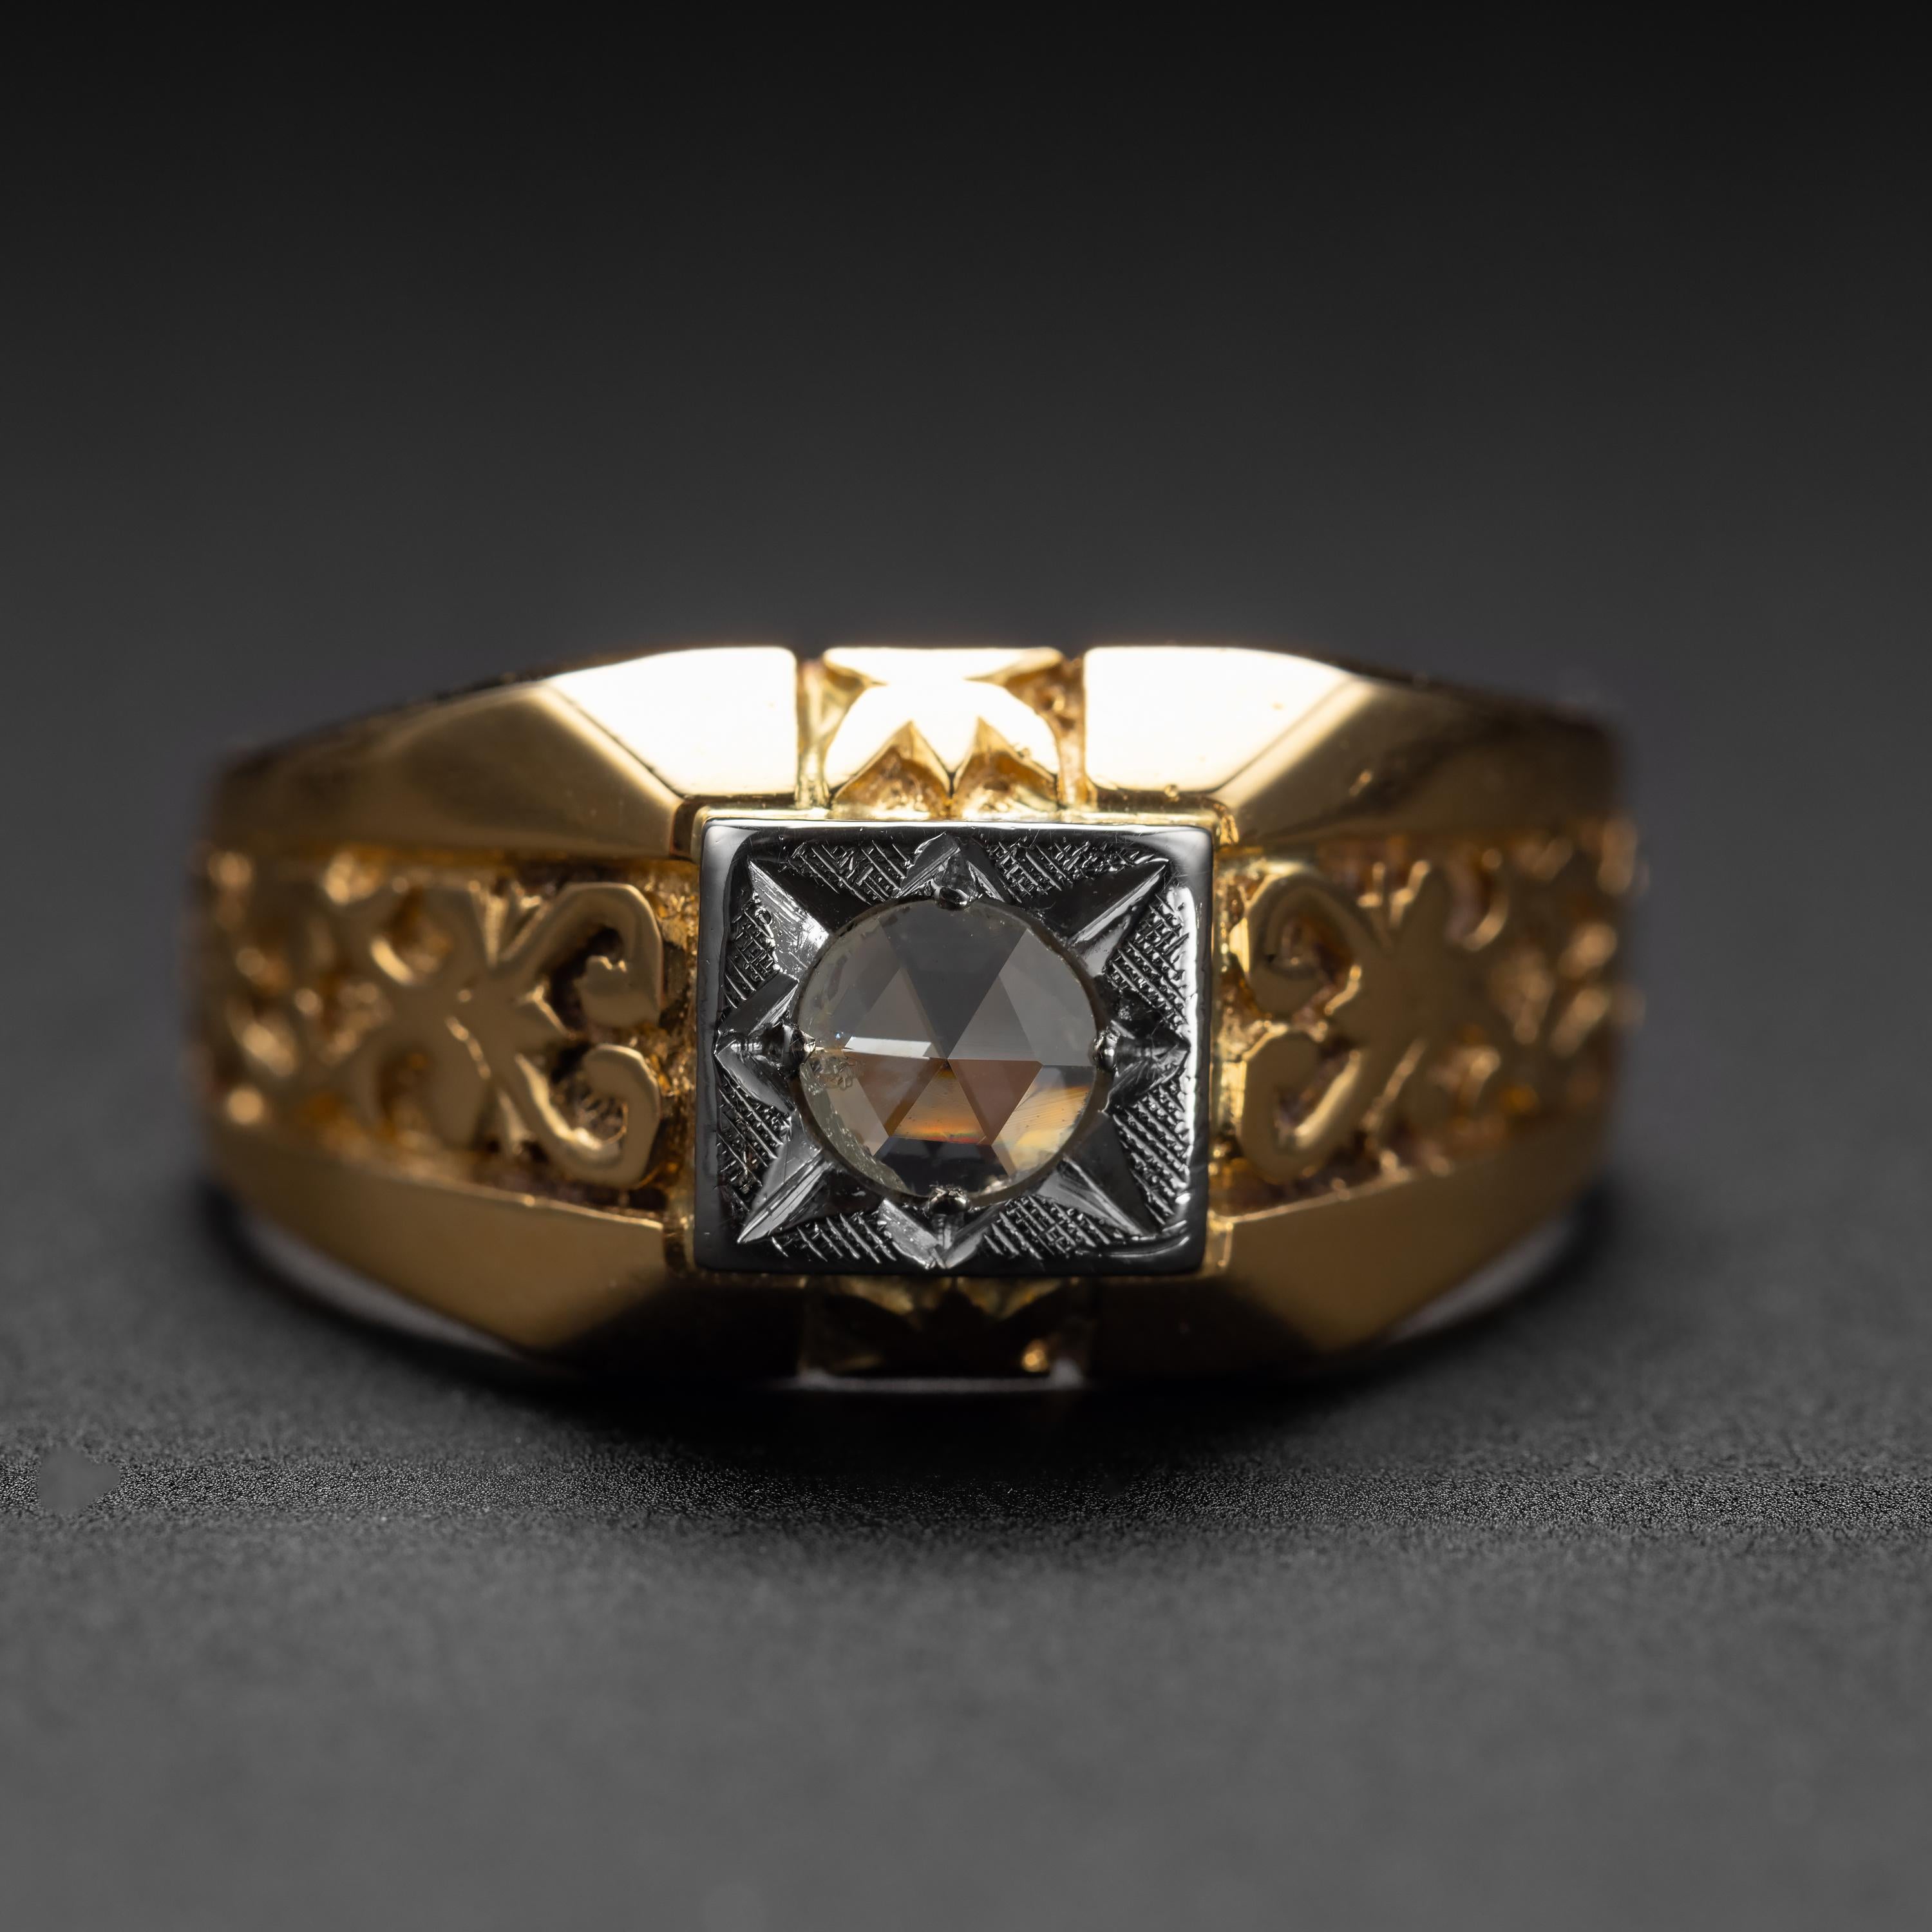 Featuring deeply hand-carved shoulders with a distinctly Jacobian sensibility, this substantial diamond ring is an extraordinary work of goldsmithing art. Originally created for a man, the ring could today of course be worn by anyone.

The Tudor and